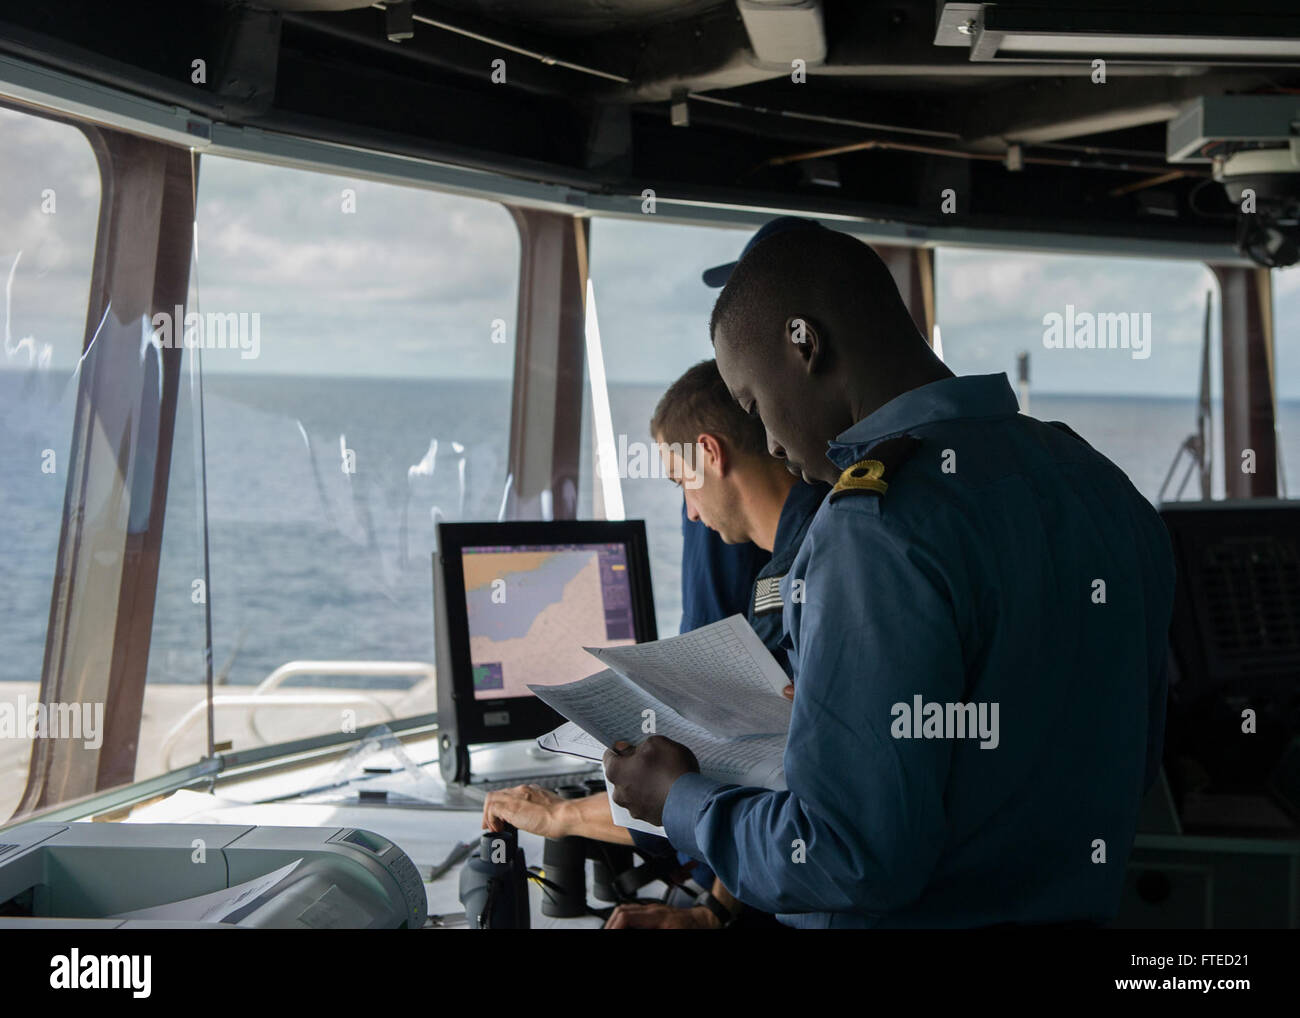 GULF OF GUINEA (April 2, 2014) - A Ghanaian sailor, left, and Lt. Jeffrey Deitel, assigned to the U.S. Coast Guard law enforcement detachment, both embarked aboard joint, high-speed vessel USNS Spearhead (JHSV 1) check documents on a suspected illegal fishing vessel as part of a U.S.-Ghana combined maritime law enforcement operation under the African Maritime Law Enforcement Partnership (AMLEP) program. AMLEP, the operational phase of Africa Partnership Station (APS), brings together U.S. Navy, U.S. Coastguard, and respective Africa partner maritime forces to actively patro Stock Photo